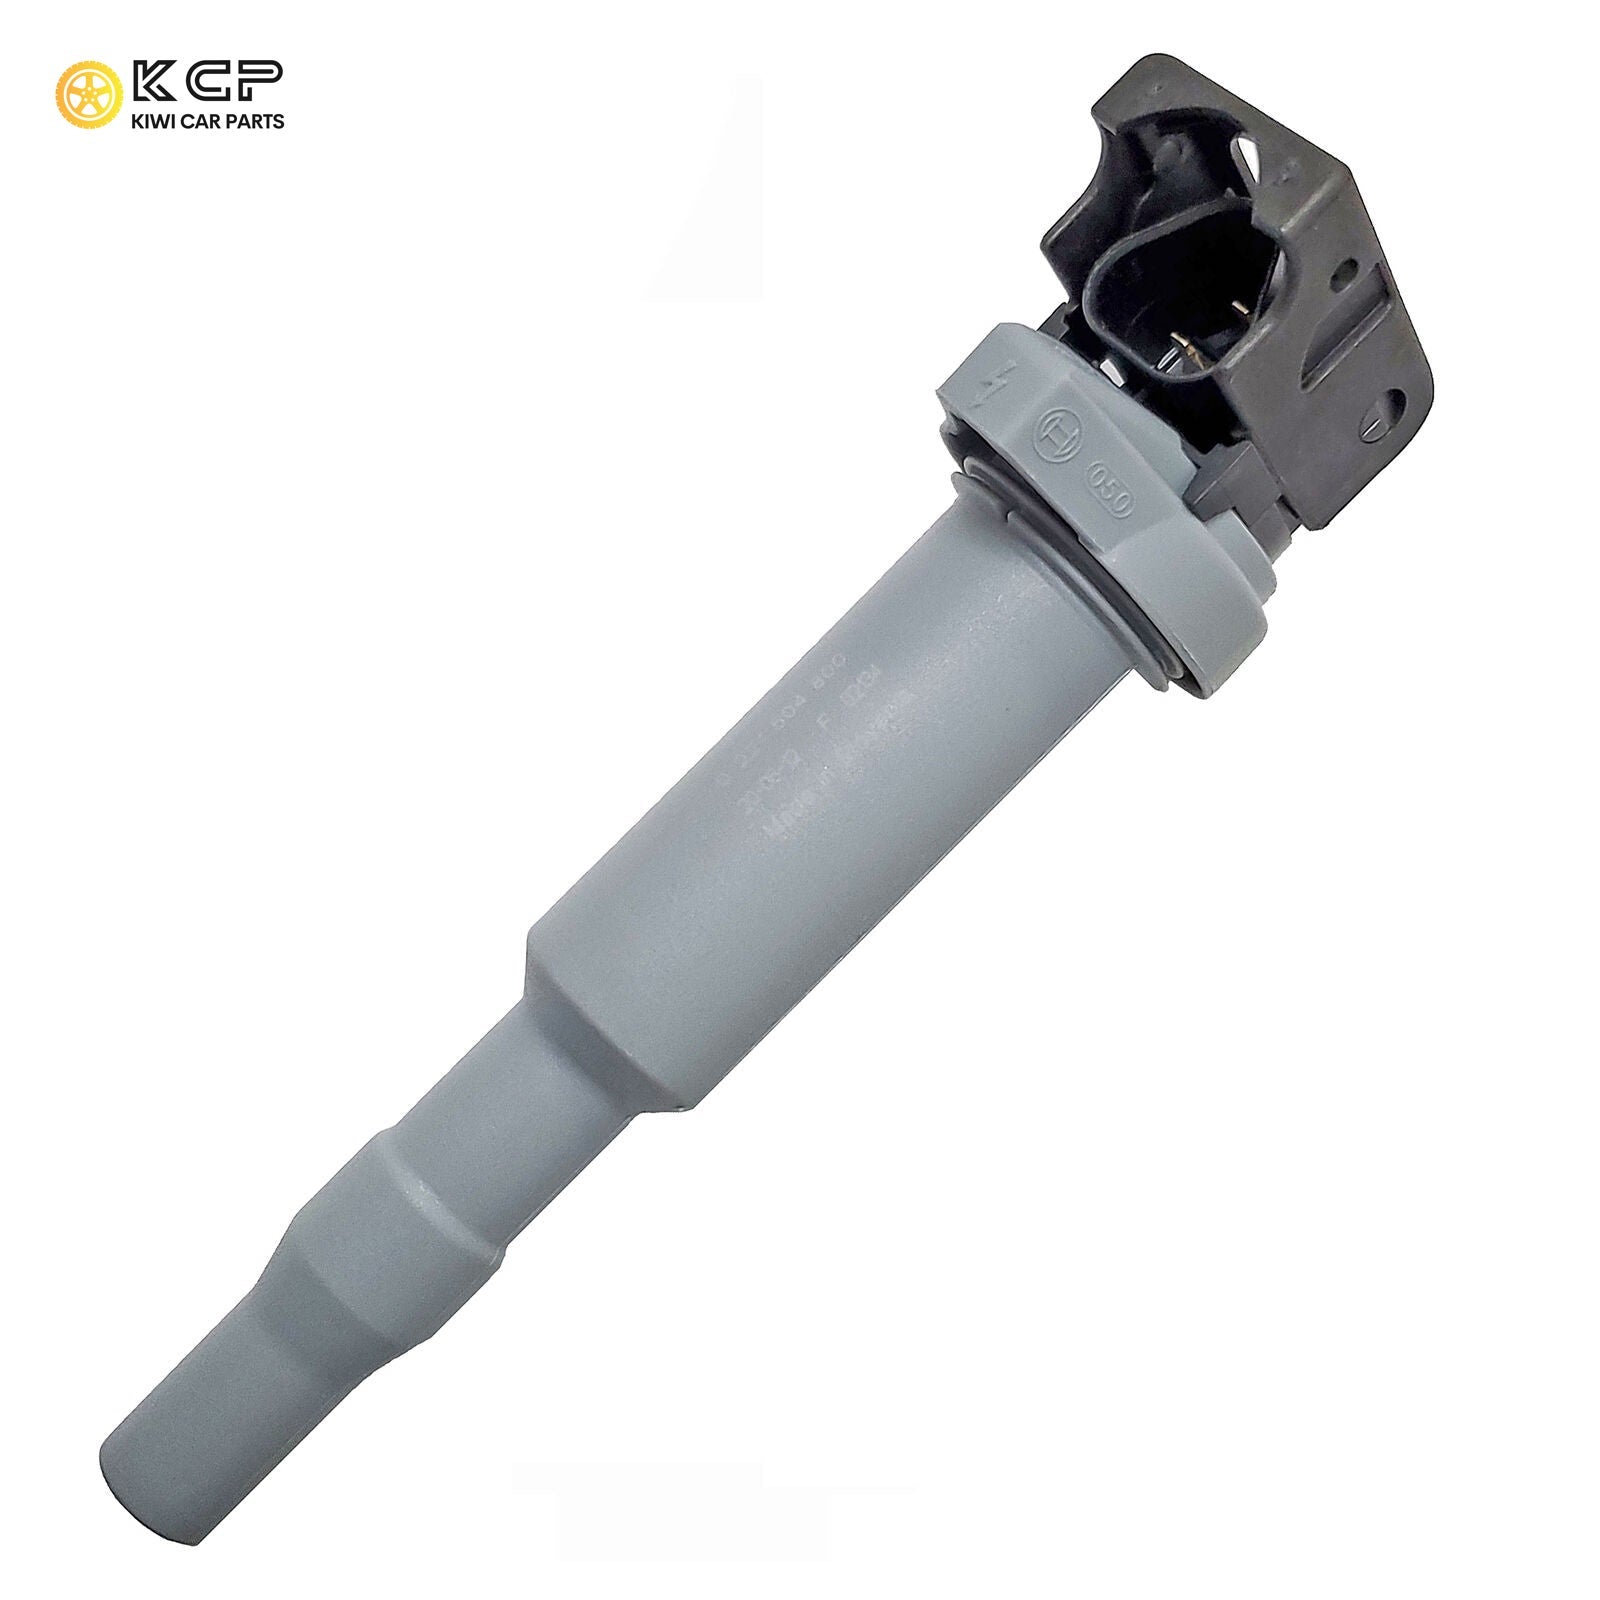 Bosch Ignition Coil 0221504800 Suitable For 2006 - 2018 BMW 1 2 3 4 5 6 7 Series, M2, M3, M4, X1, X3, X5, X6, Z4, Mini Cooper, Countryman, Paceman Car Ignition Coils 12120034098 Mini Cooper S Paceman 12120034098 BMW Mini Ignition kit NZ stock Auckland 12120034098